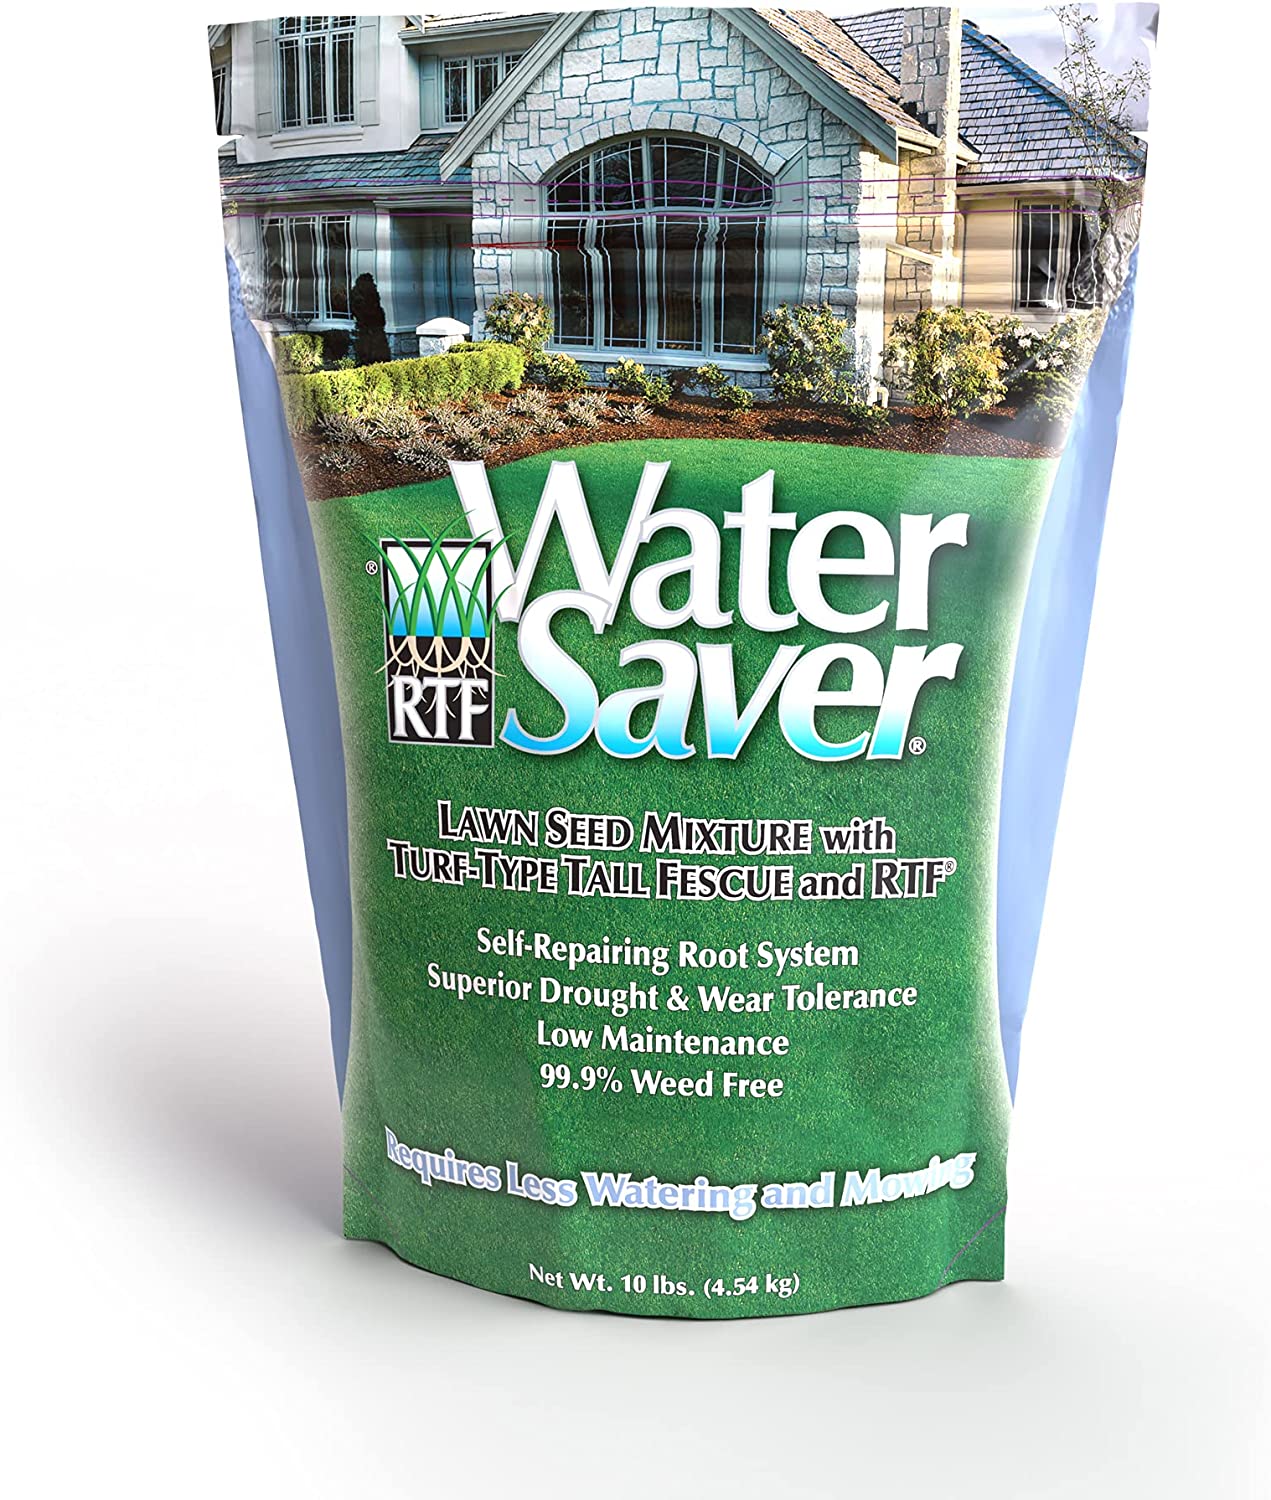 WaterSaver Grass Mixture with Turf-Type Tall Fescue [...]